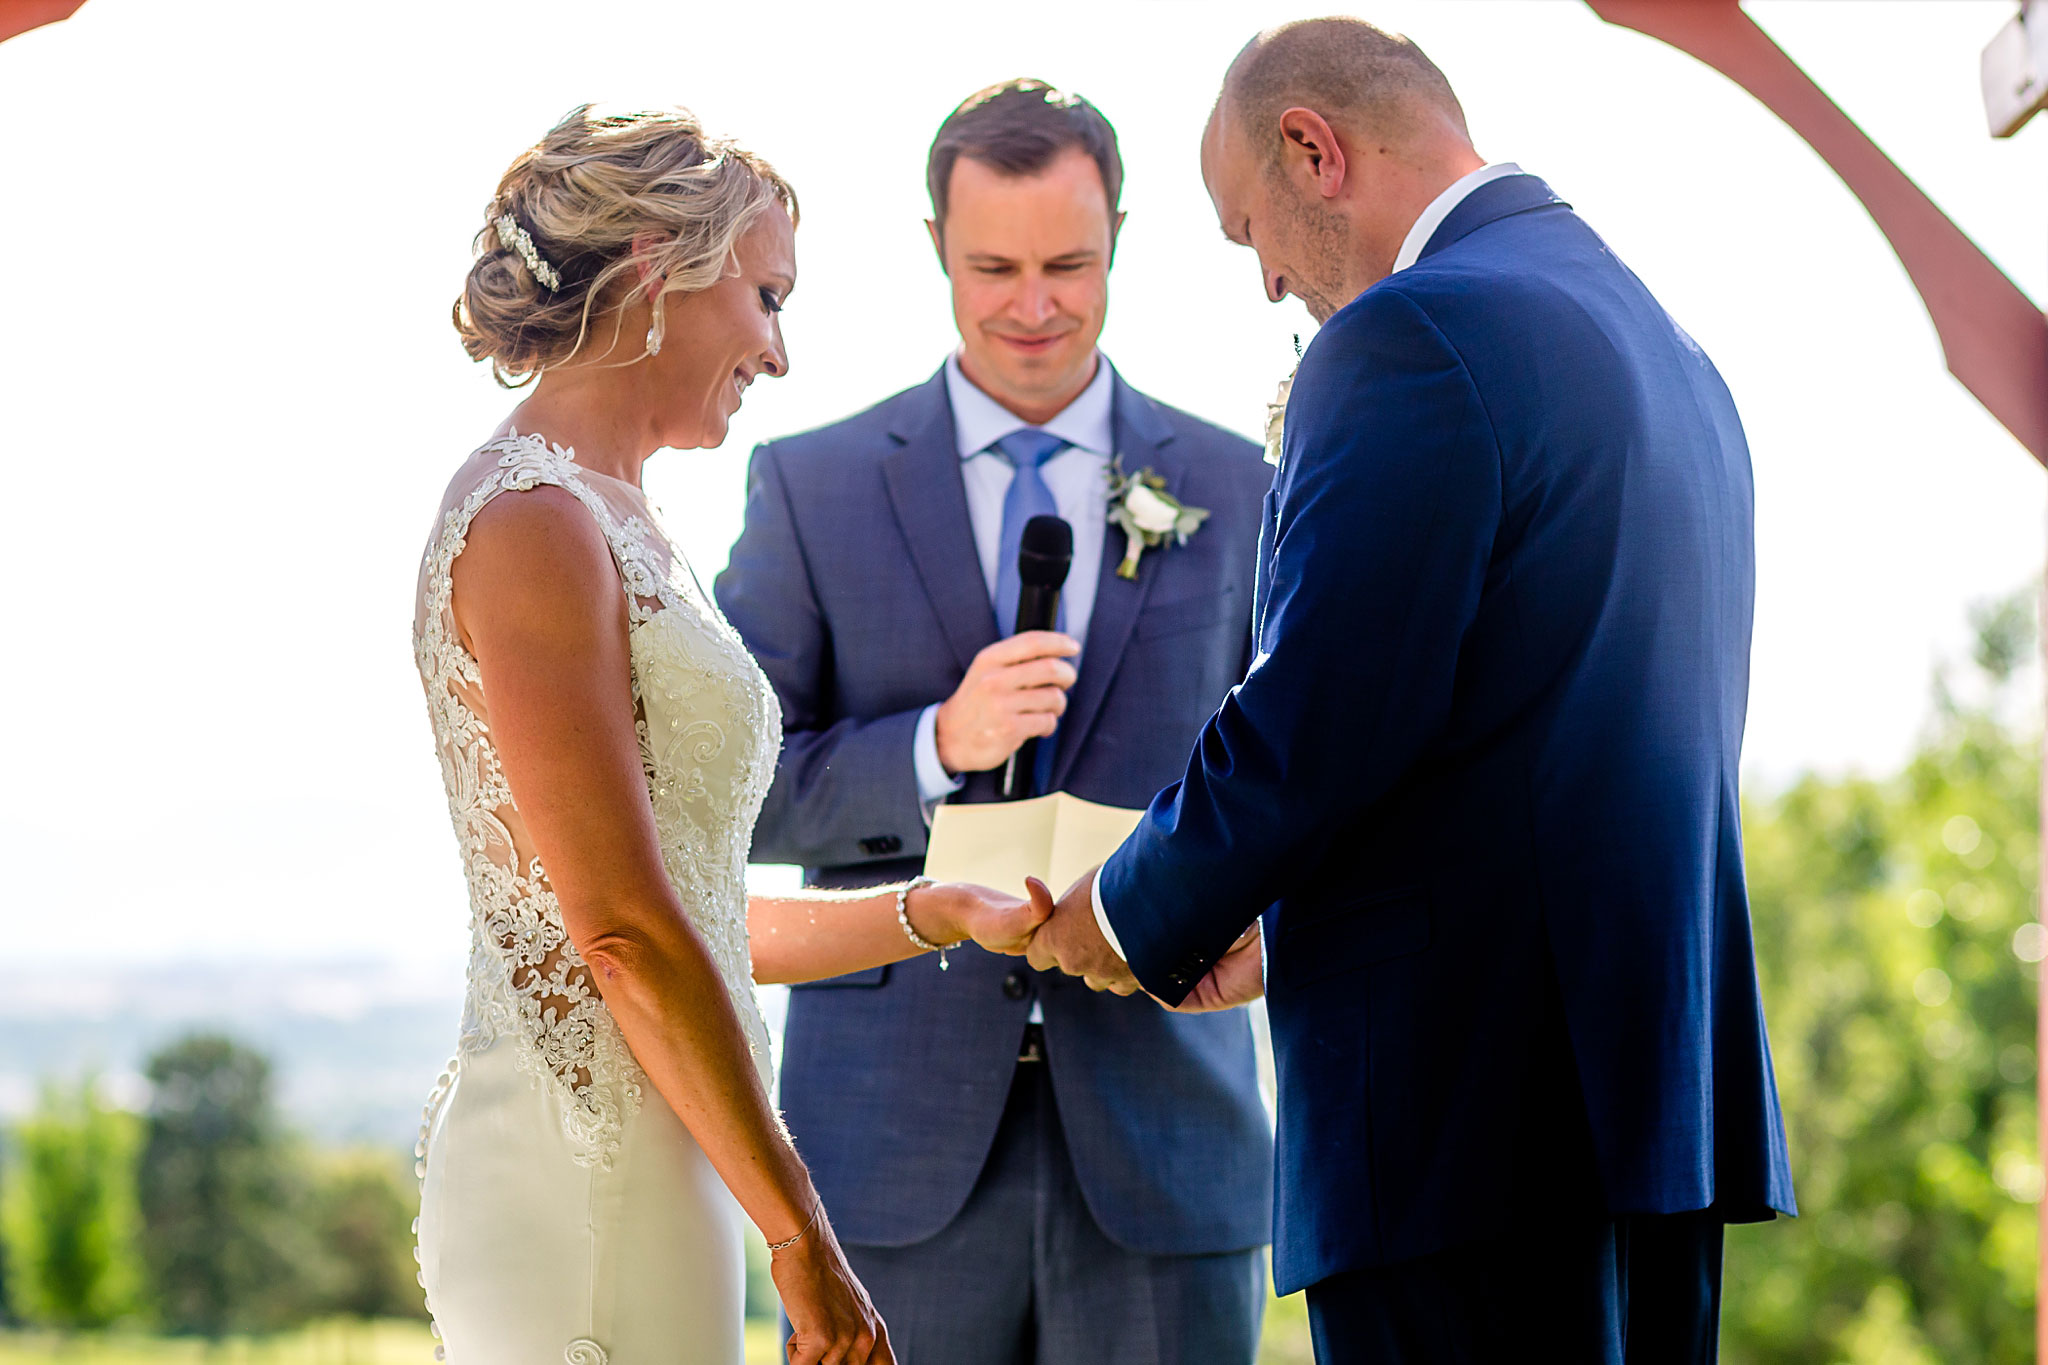 Bride and Groom exchanging rings. Kelli & Jason's golf course wedding at The Ranch Country Club by Colorado Wedding Photographer Jennifer Garza, Small wedding ideas, Intimate wedding, Golf Course Wedding, Country Club Wedding, Summer Wedding, Golf Wedding, Wedding planning, Colorado Wedding Photographer, Colorado Elopement Photographer, Colorado Elopement, Colorado Wedding, Denver Wedding Photographer, Denver Wedding, Wedding Inspiration, Summer Wedding Inspiration, Covid Wedding, Colorado Bride